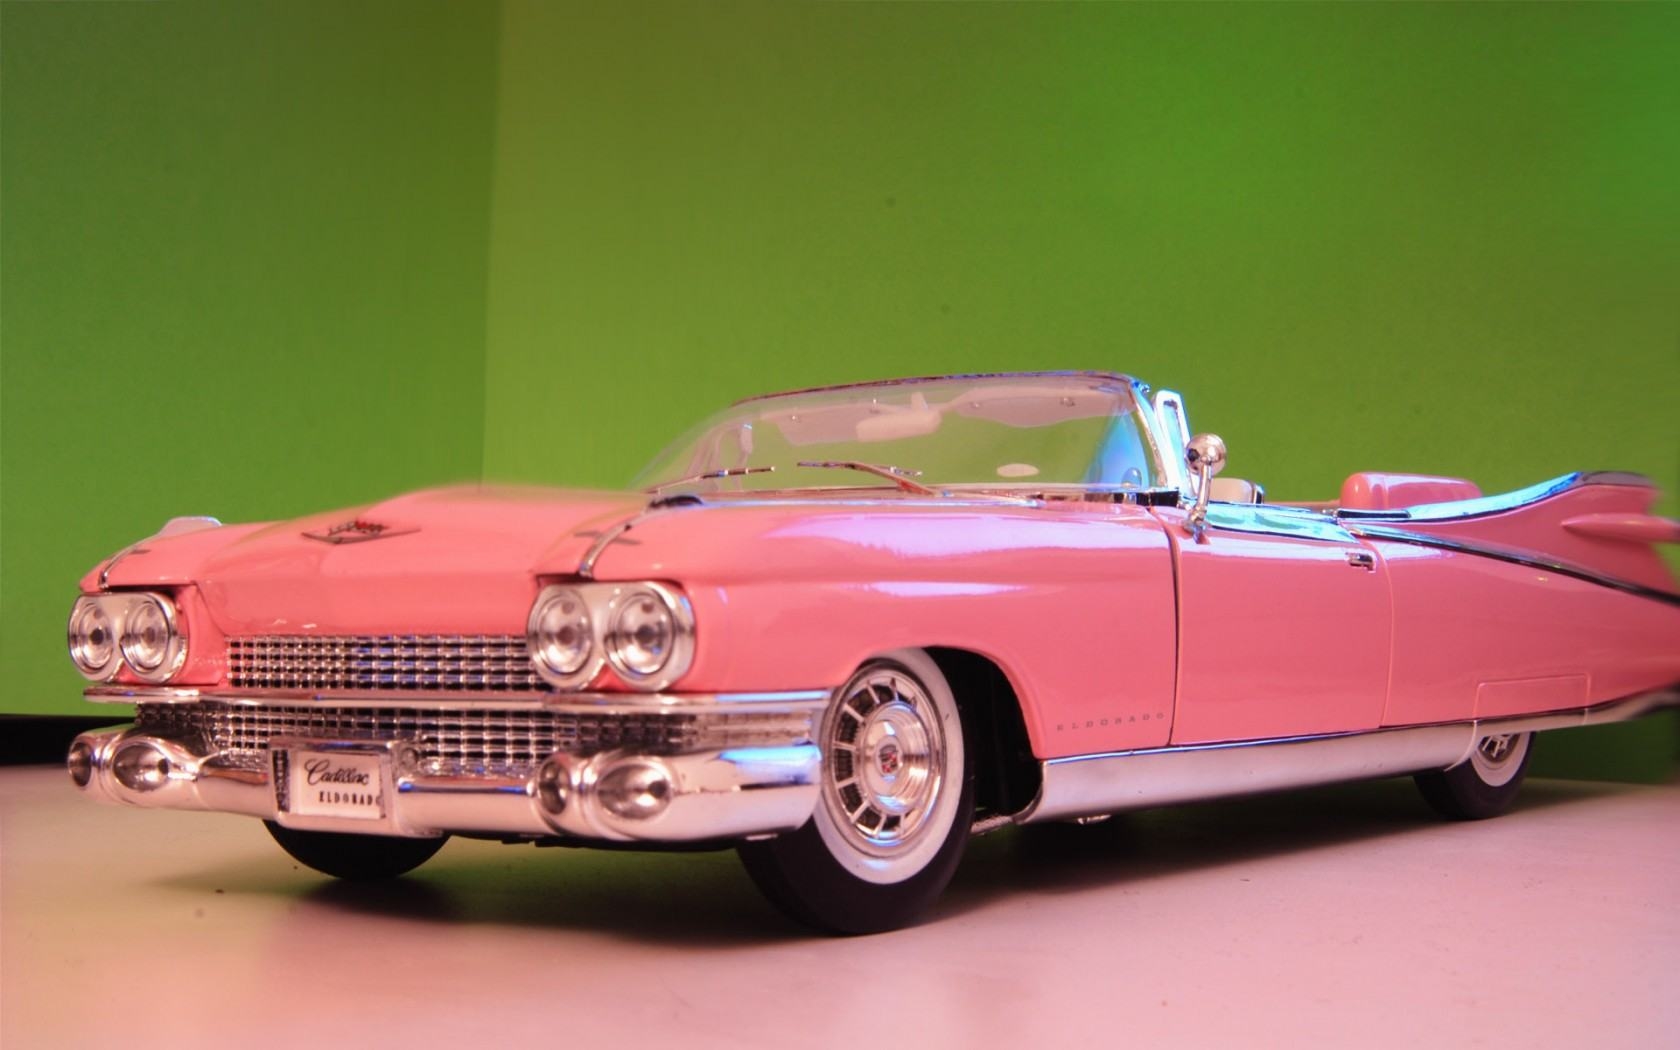 Wallpapers Backgrounds Pink Caddy Cadillac Cars Classic Convertible